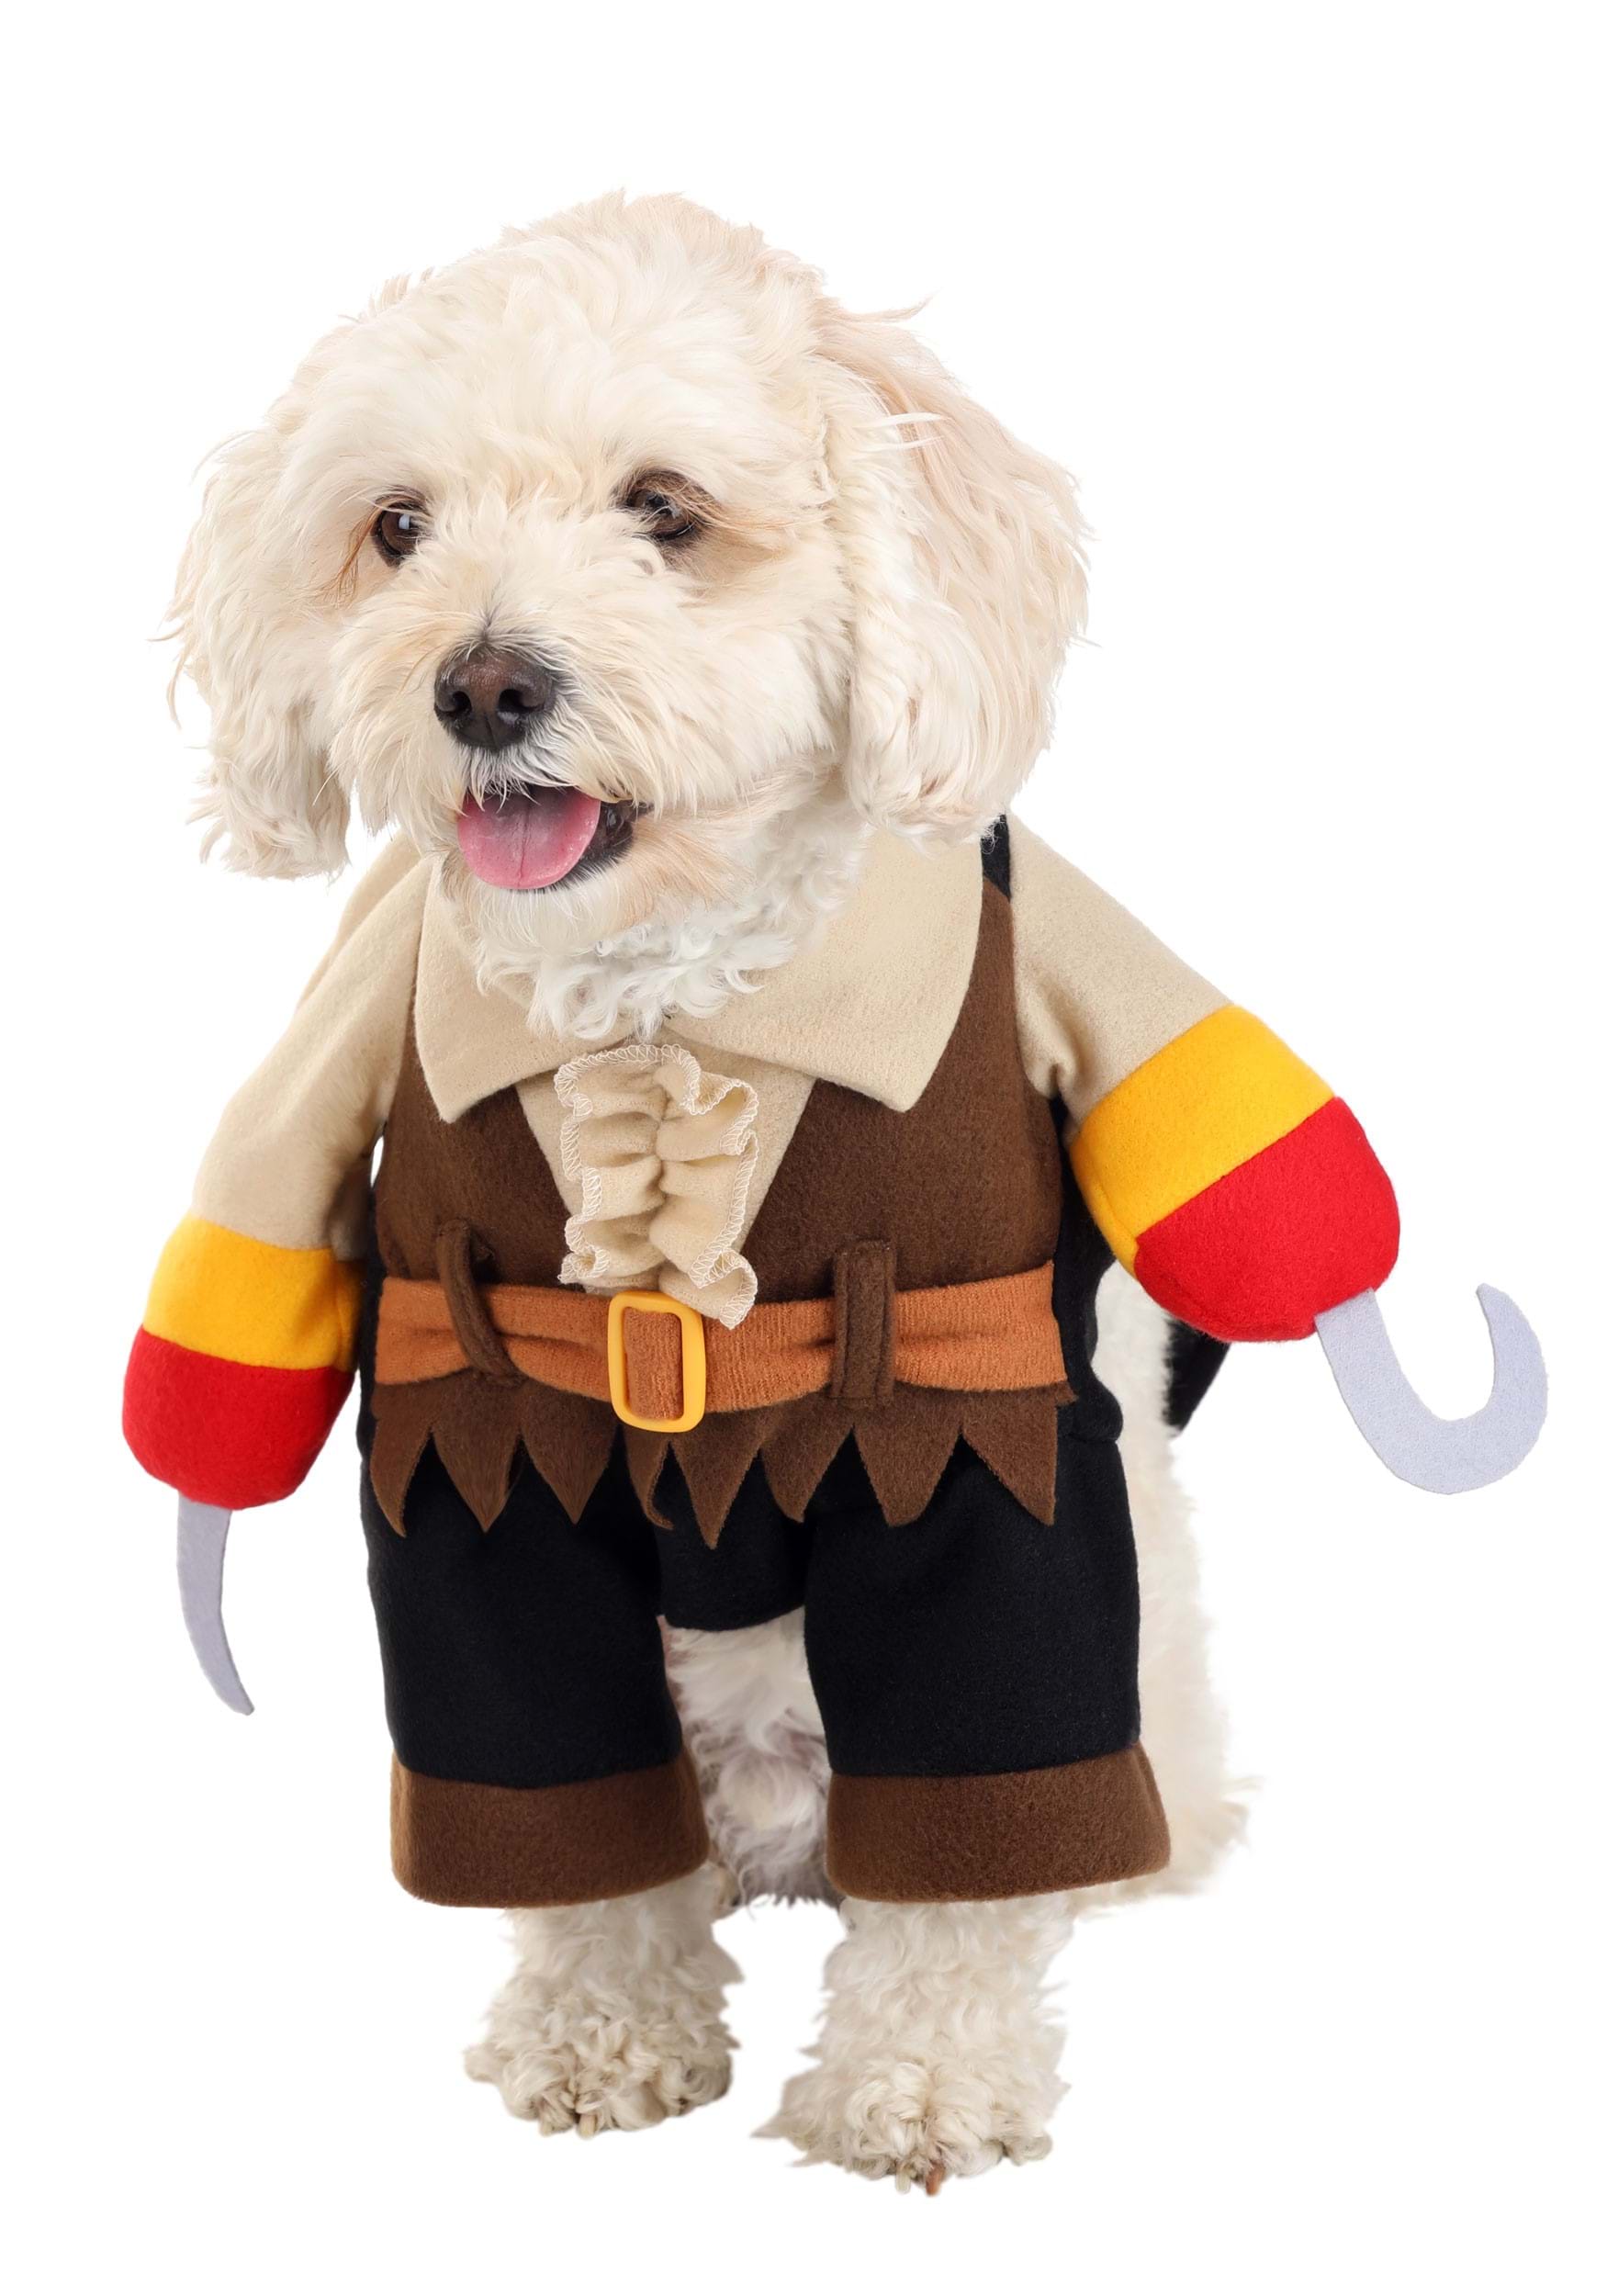 Pirate Costume For Dogs